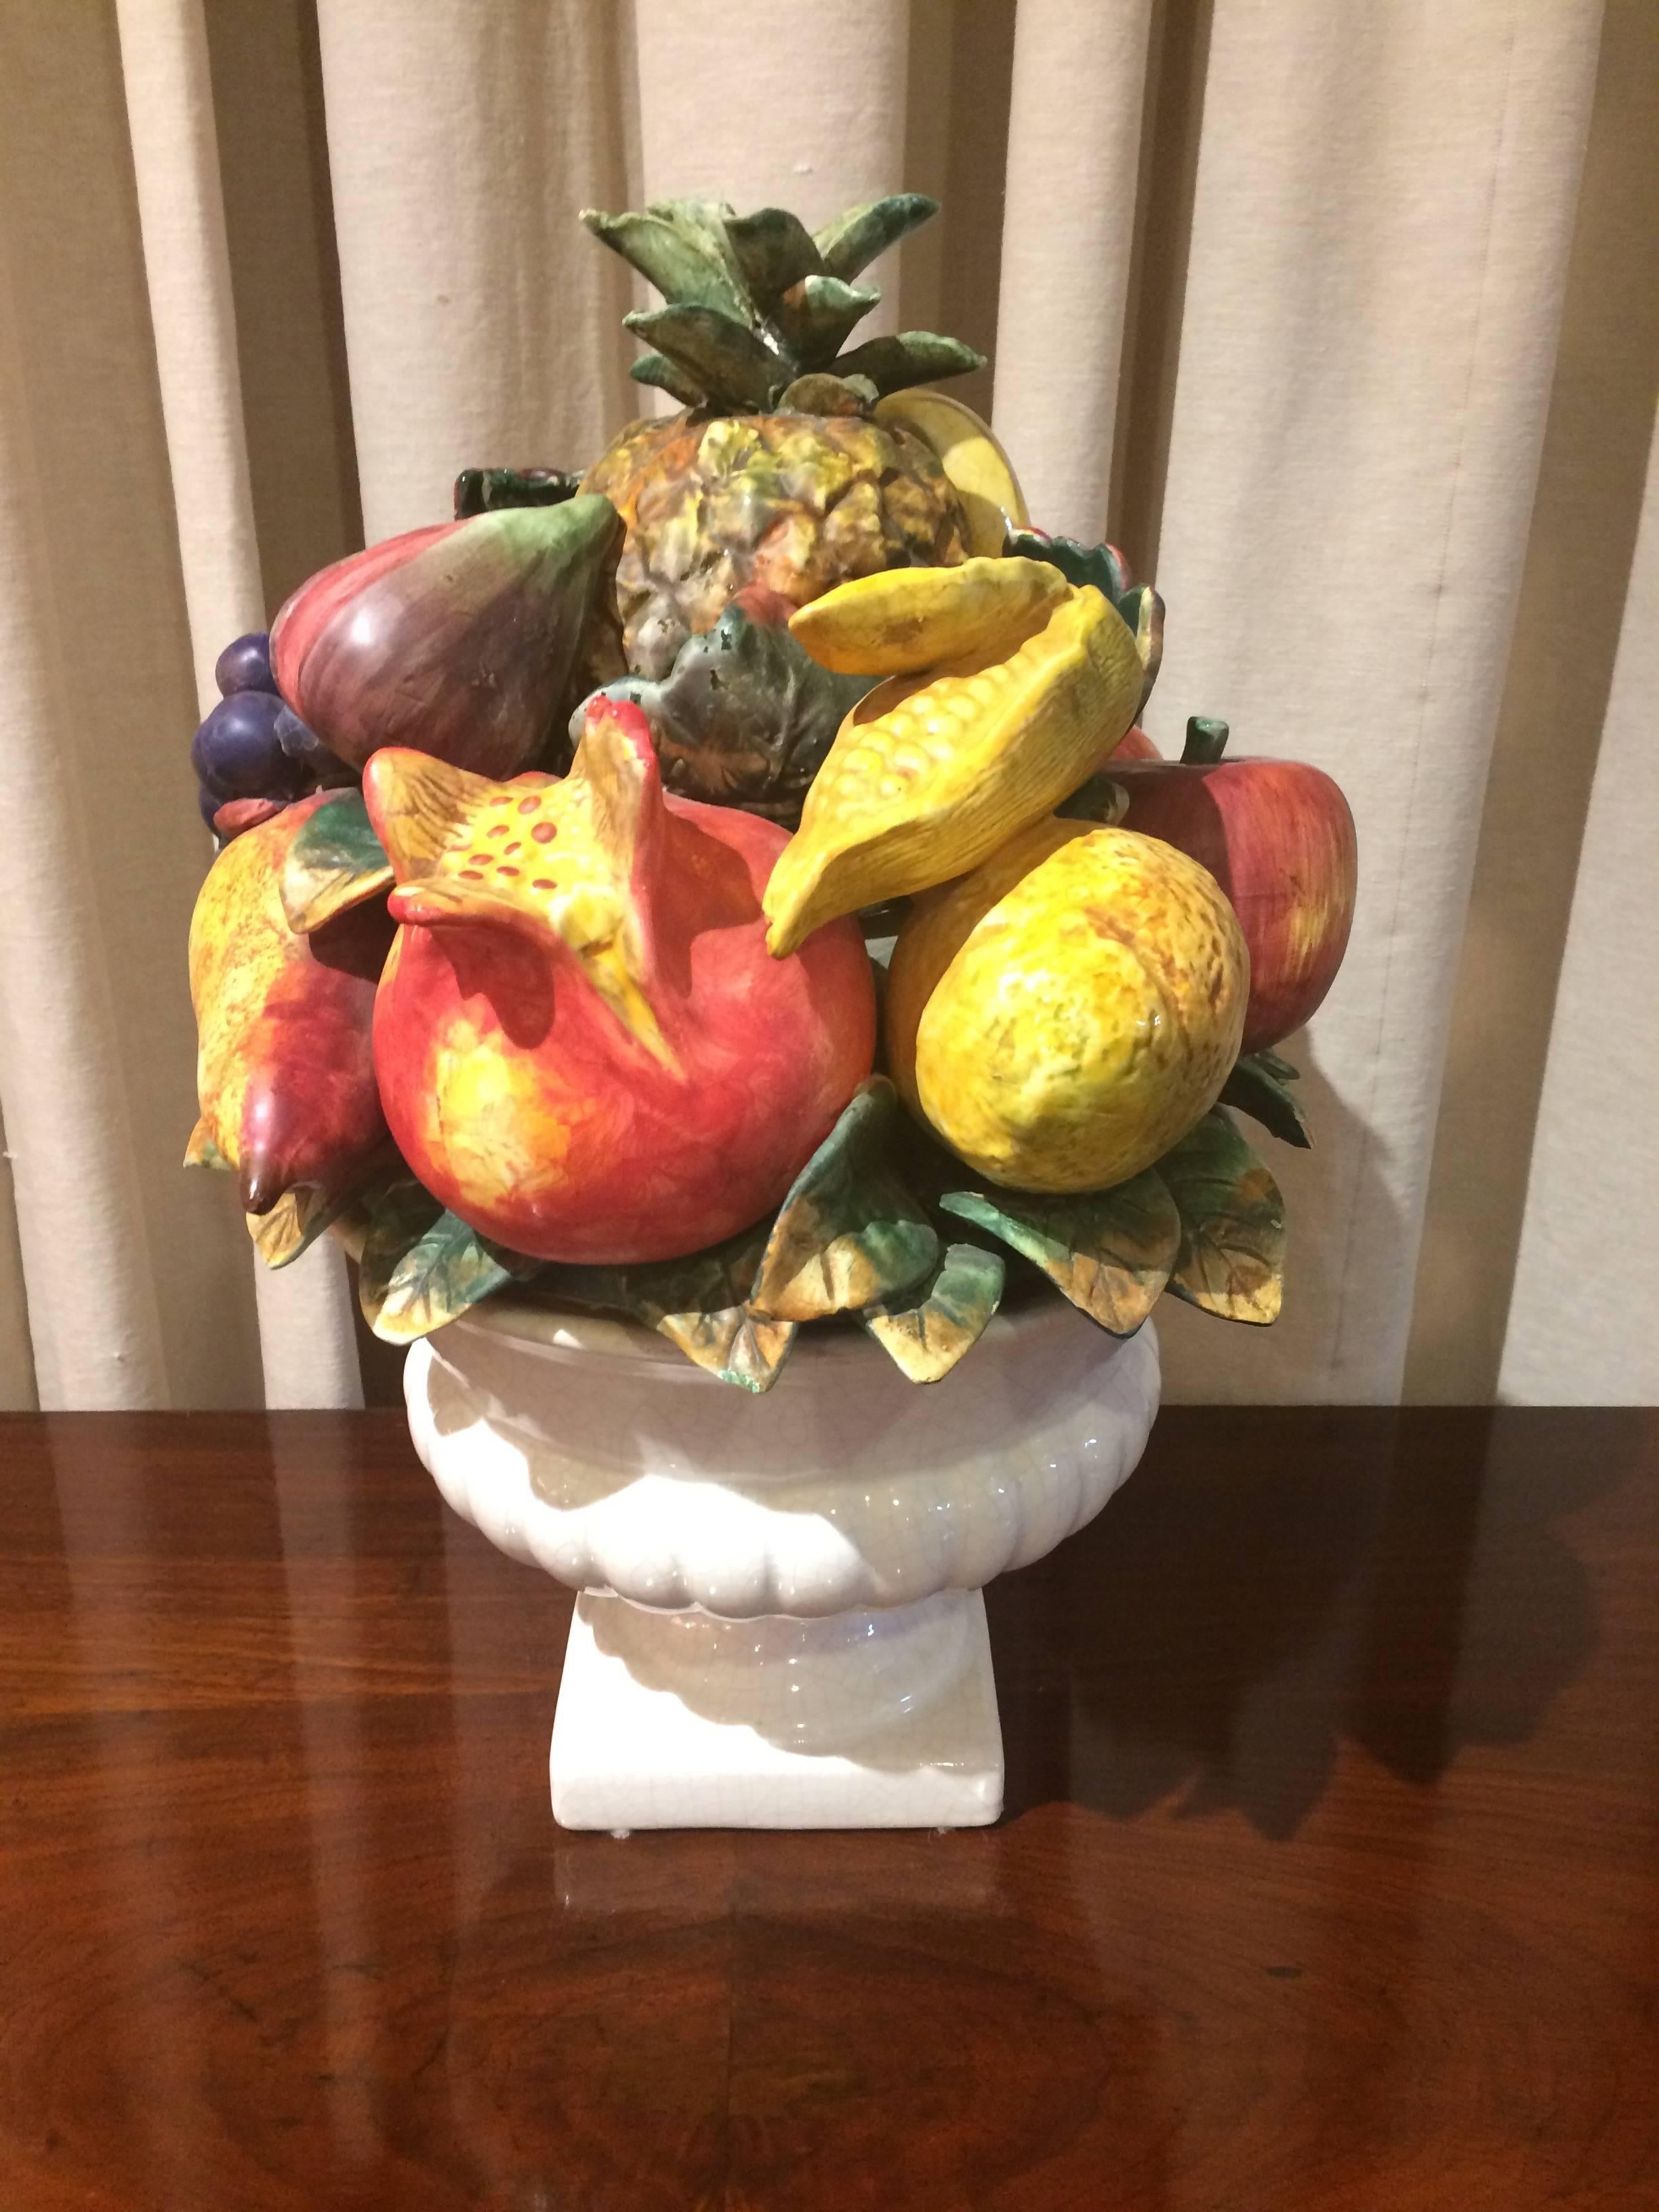 Wonderful sculptural centerpiece having a white ribbed ceramic bowl overflowing with an artful arrangement of luscious fruit including pineapple, pomegranate, grapes, figs, bananas and more.